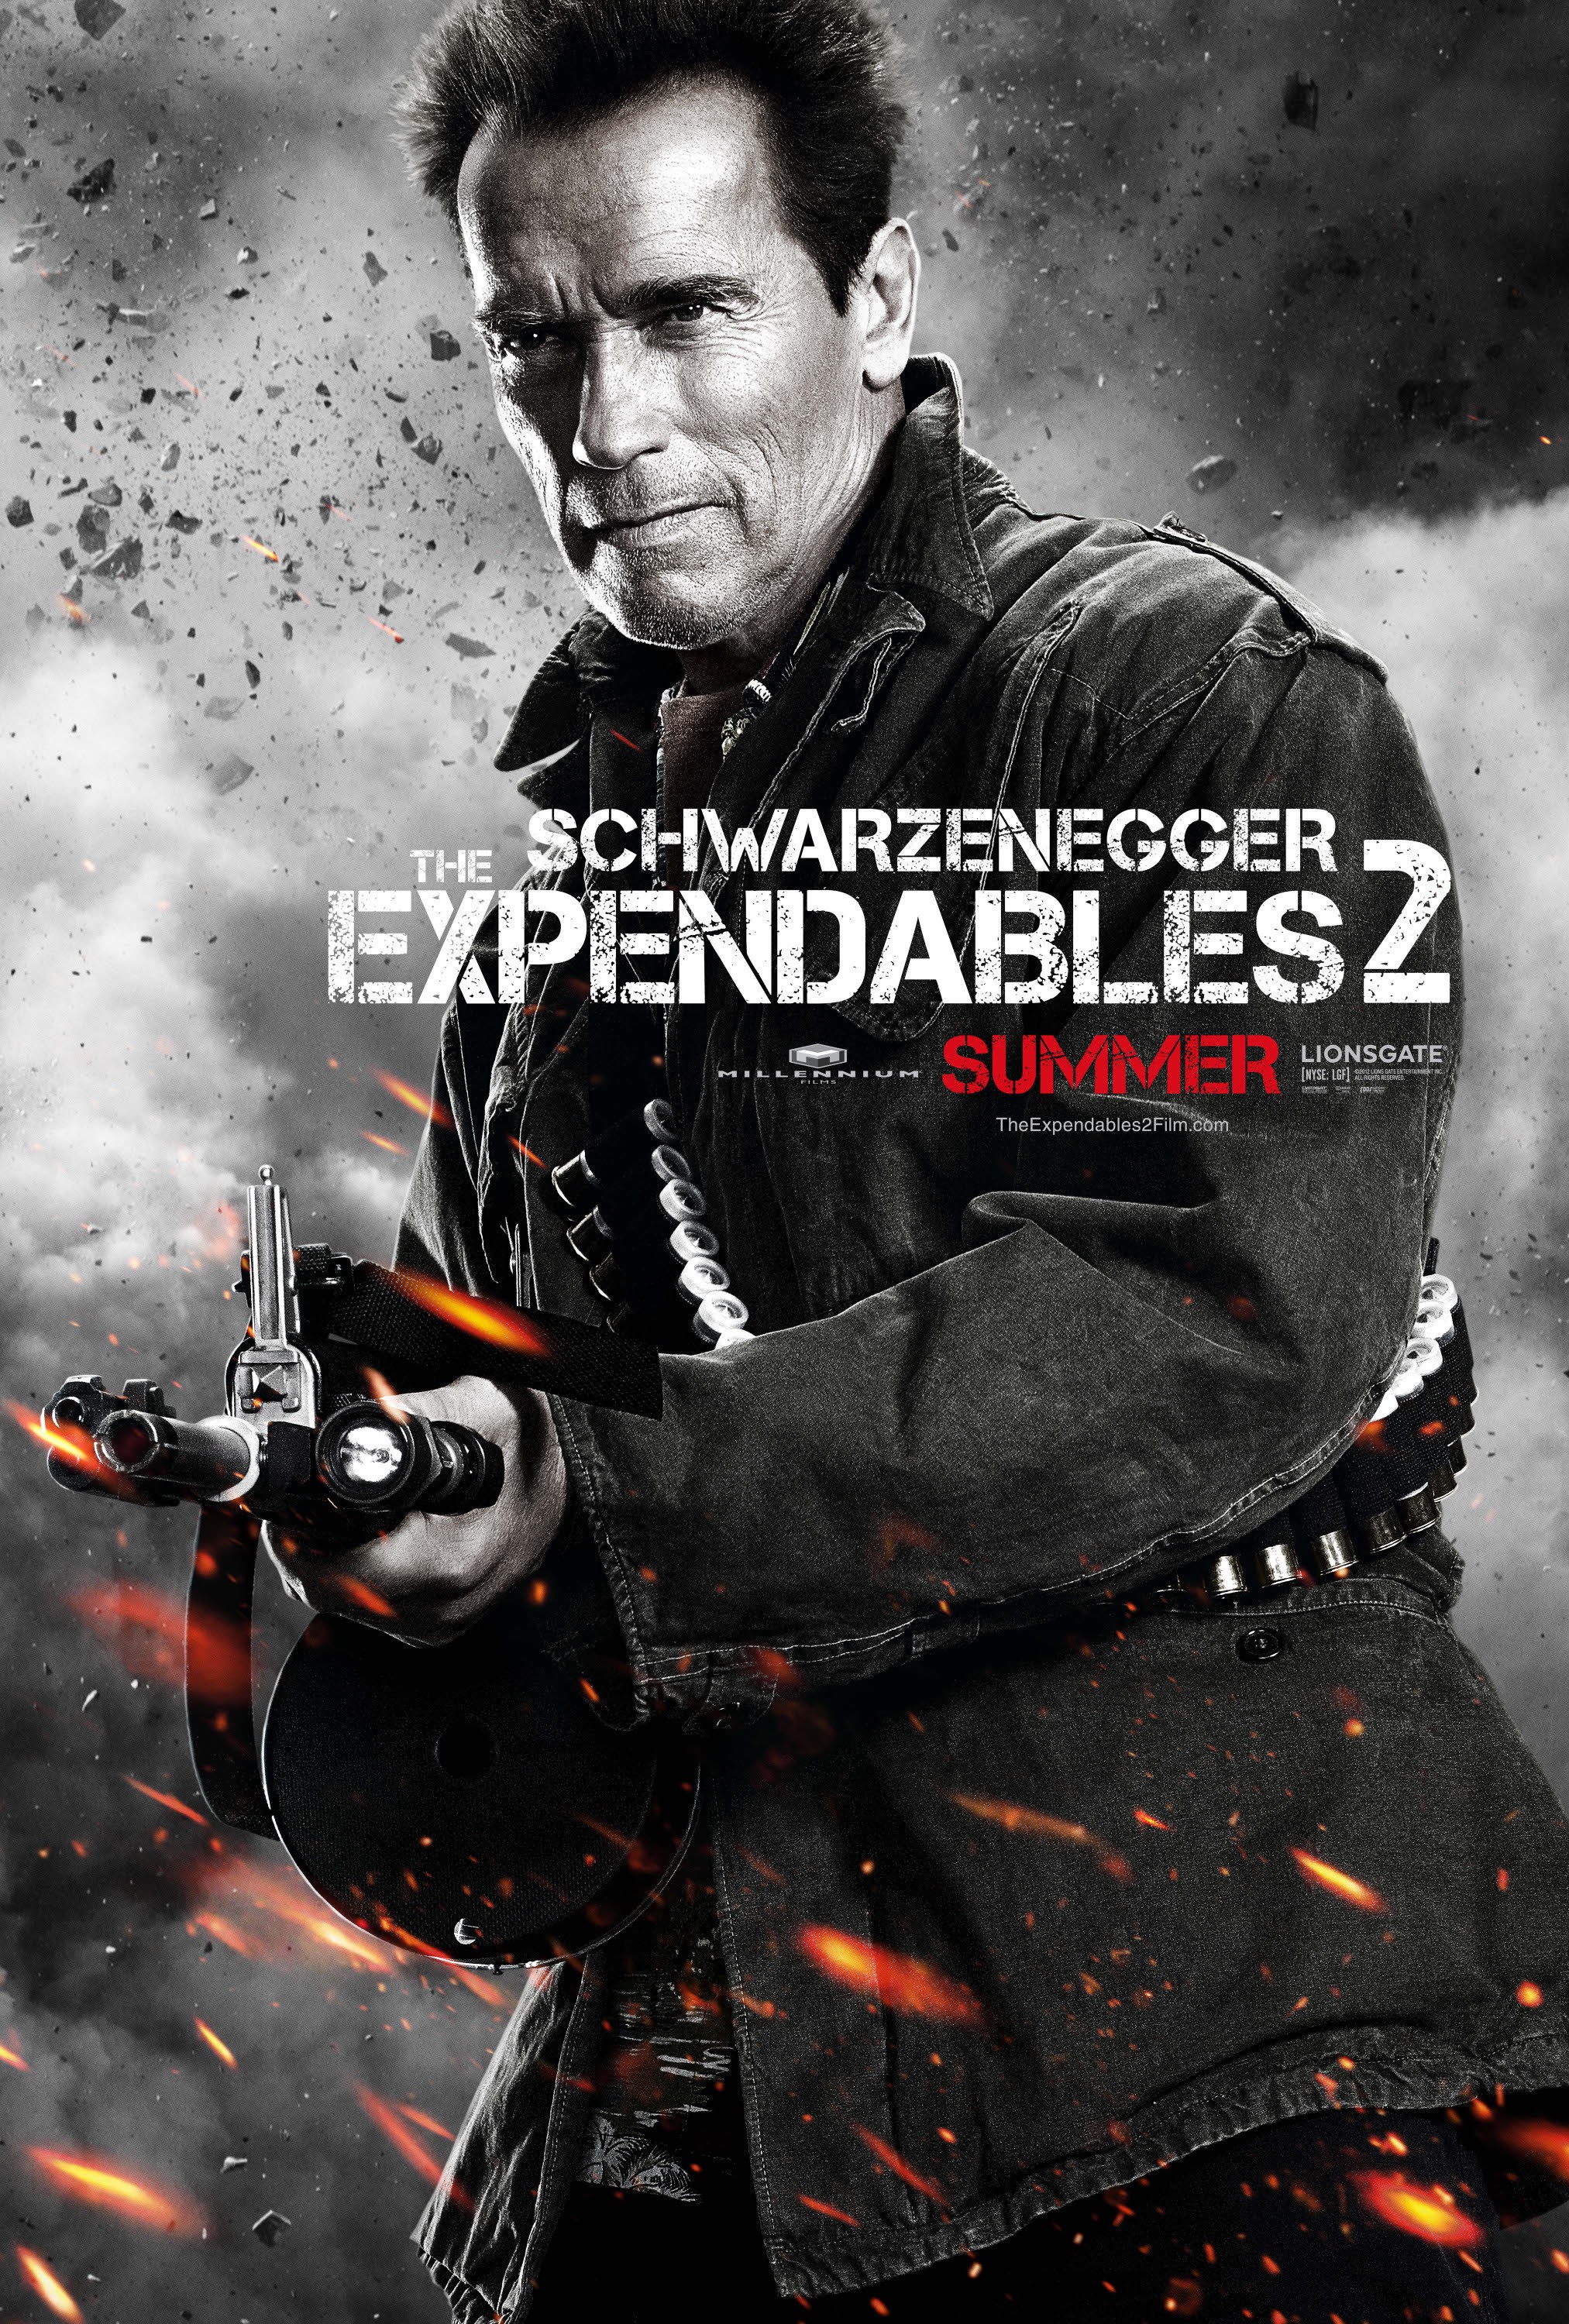 Mega Sized Movie Poster Image for The Expendables 2 (#13 of 21)